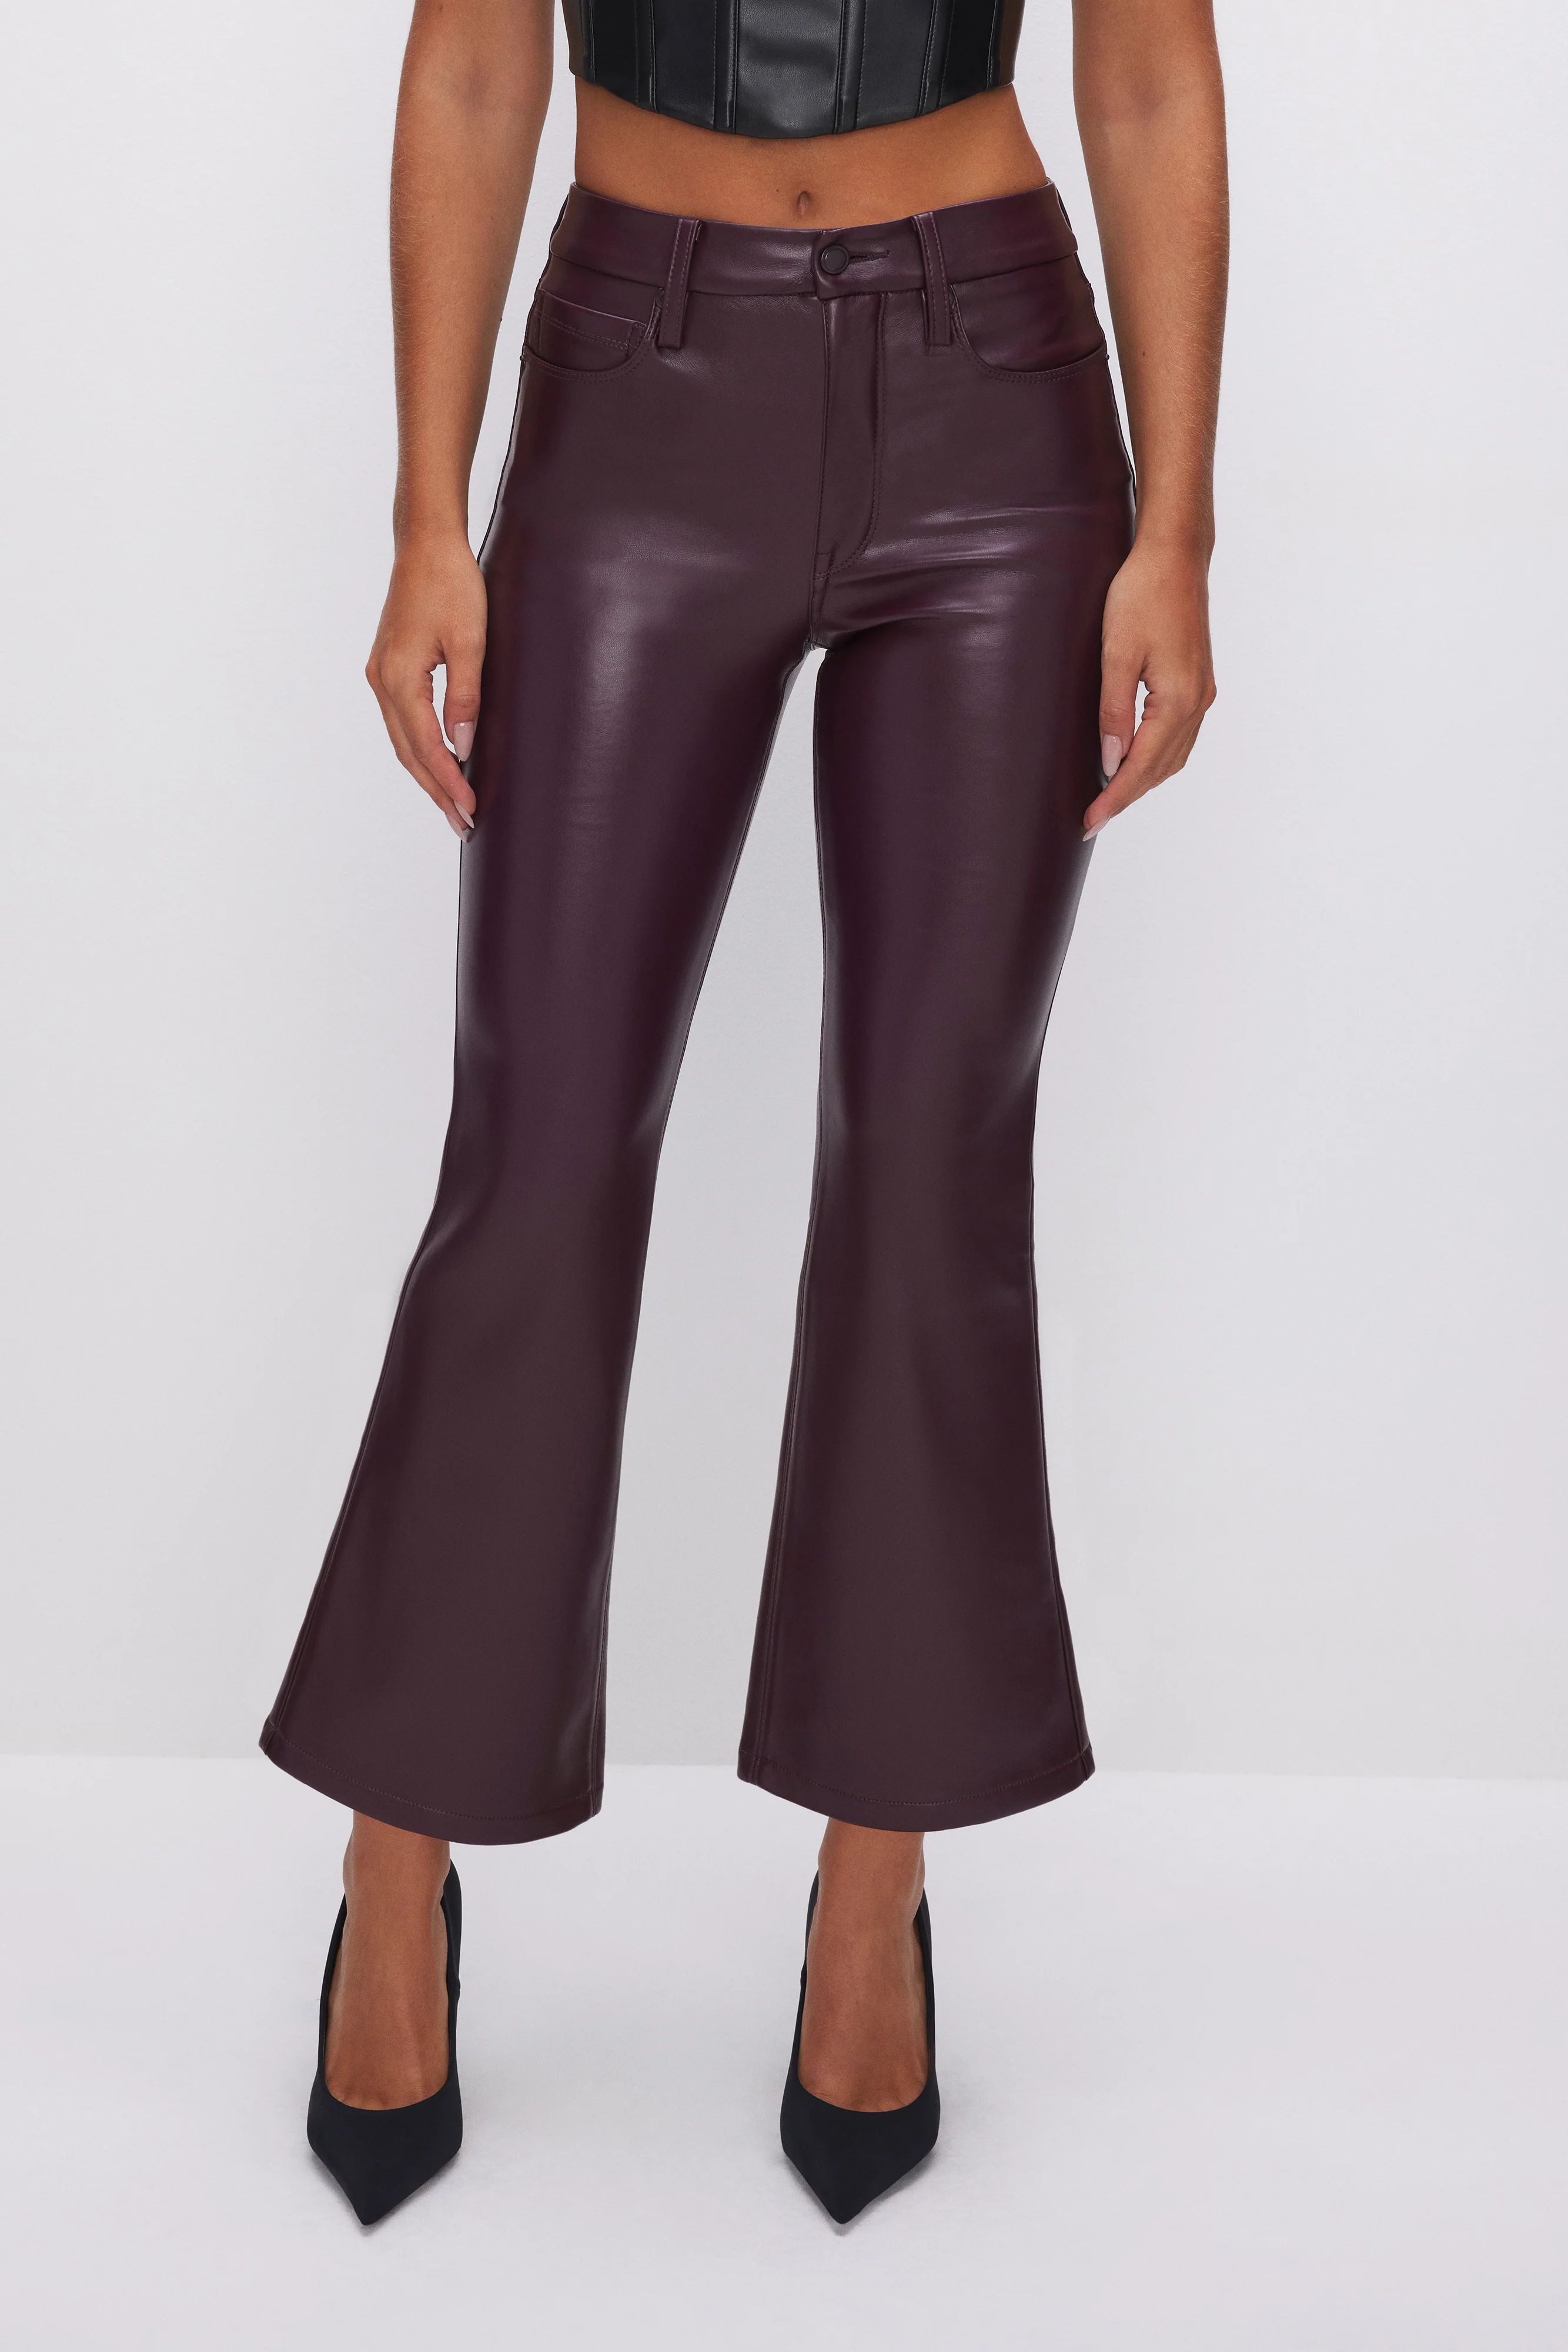 GOOD LEGS CROPPED MINI BOOT FAUX LEATHER PANTS | Good American